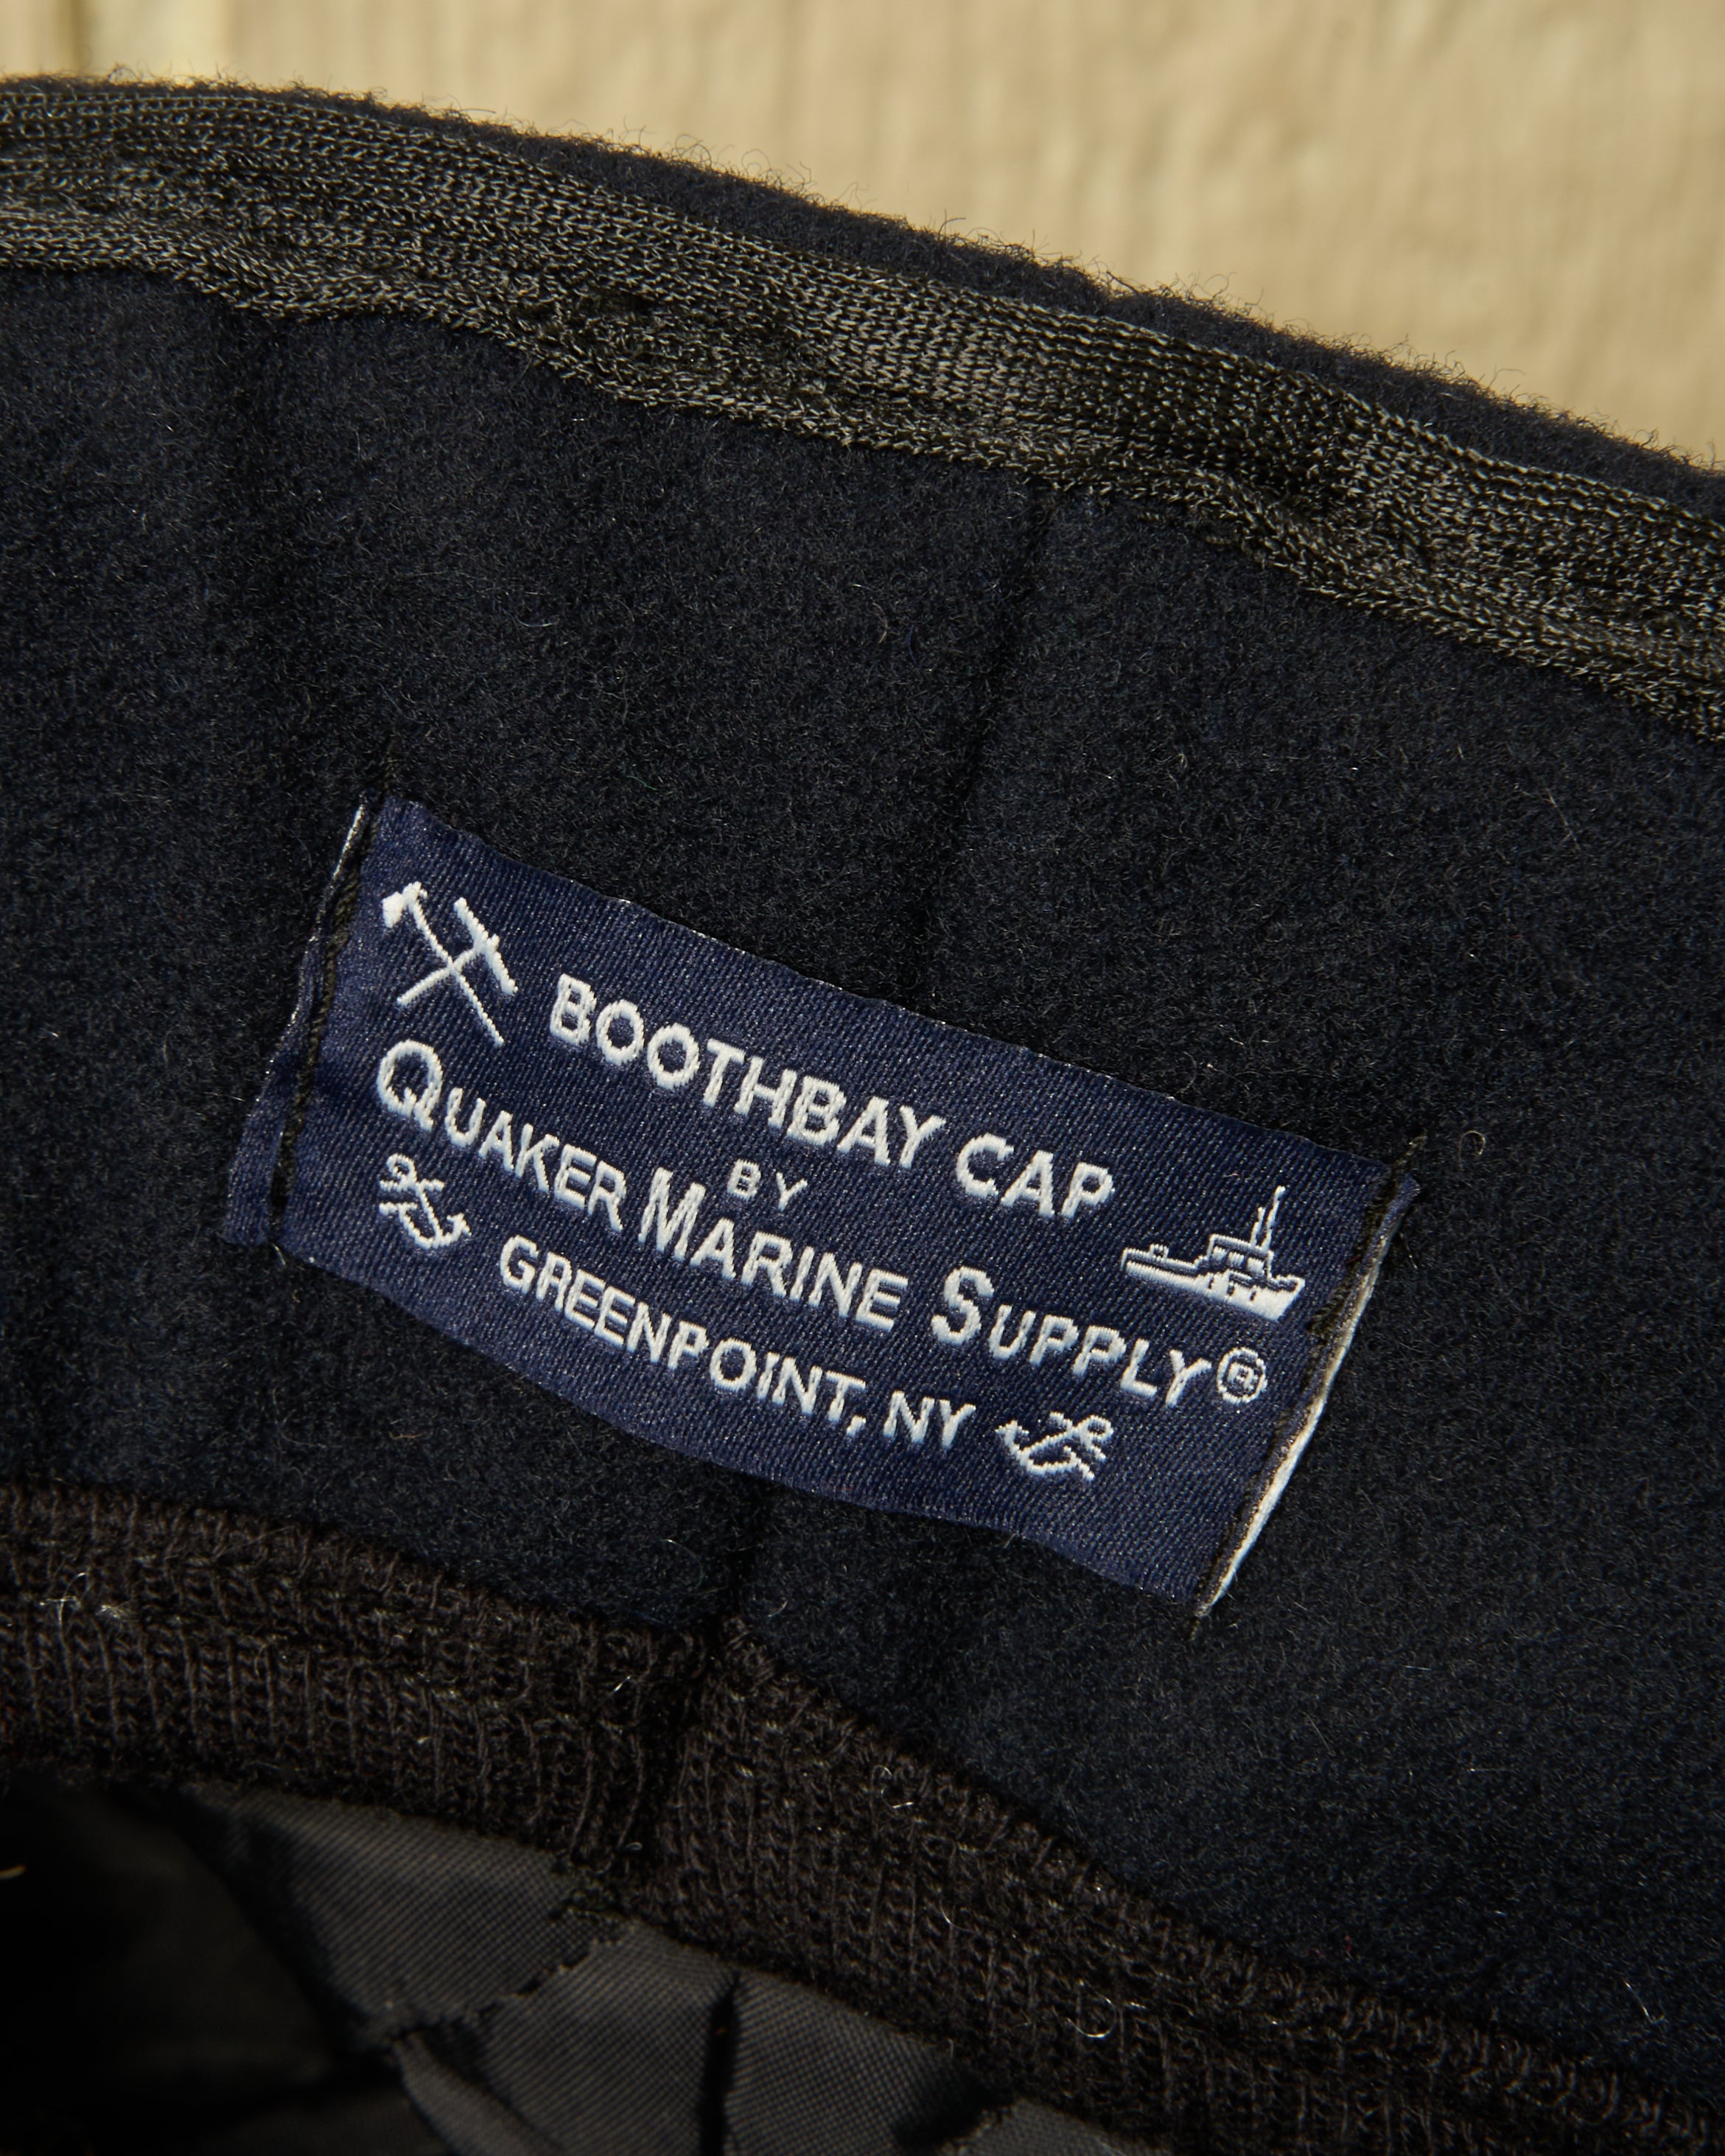 Boothbay Cap in Navy Melton Wool – Quaker Marine Supply Co.